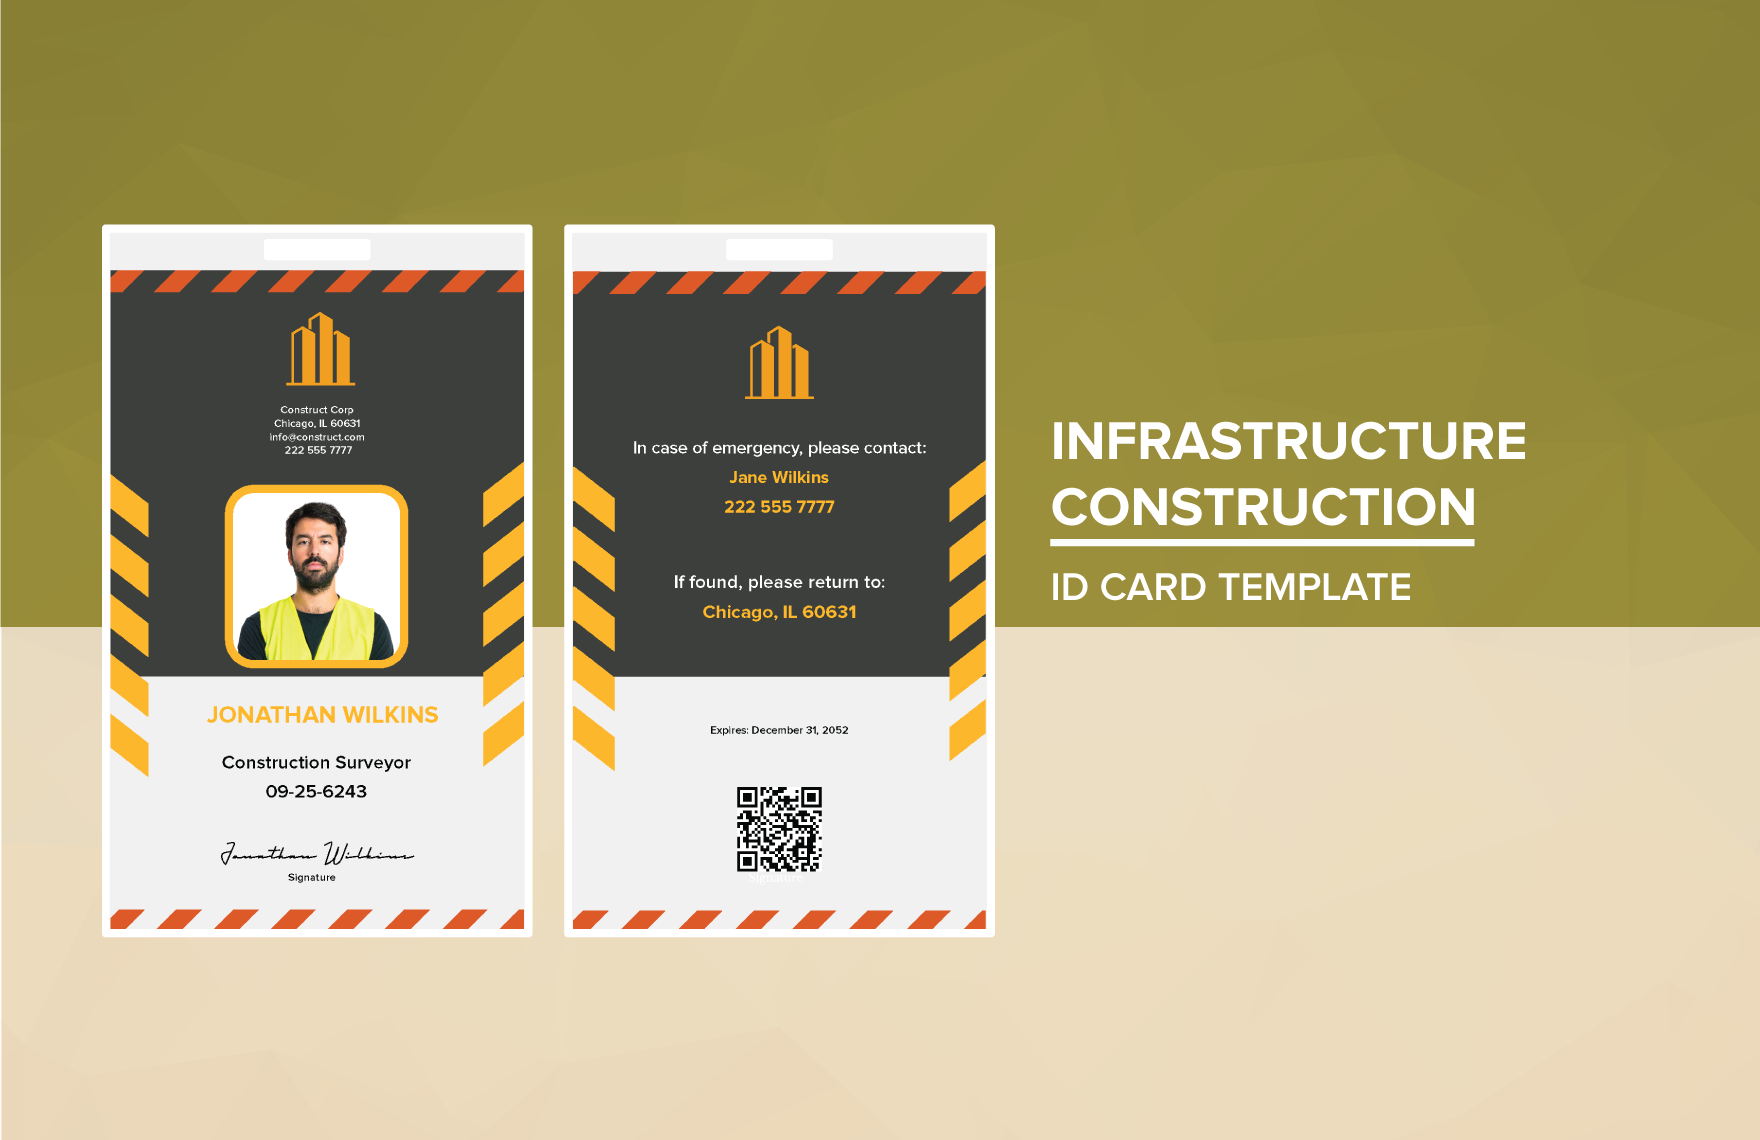 Infrastructure Construction ID Card